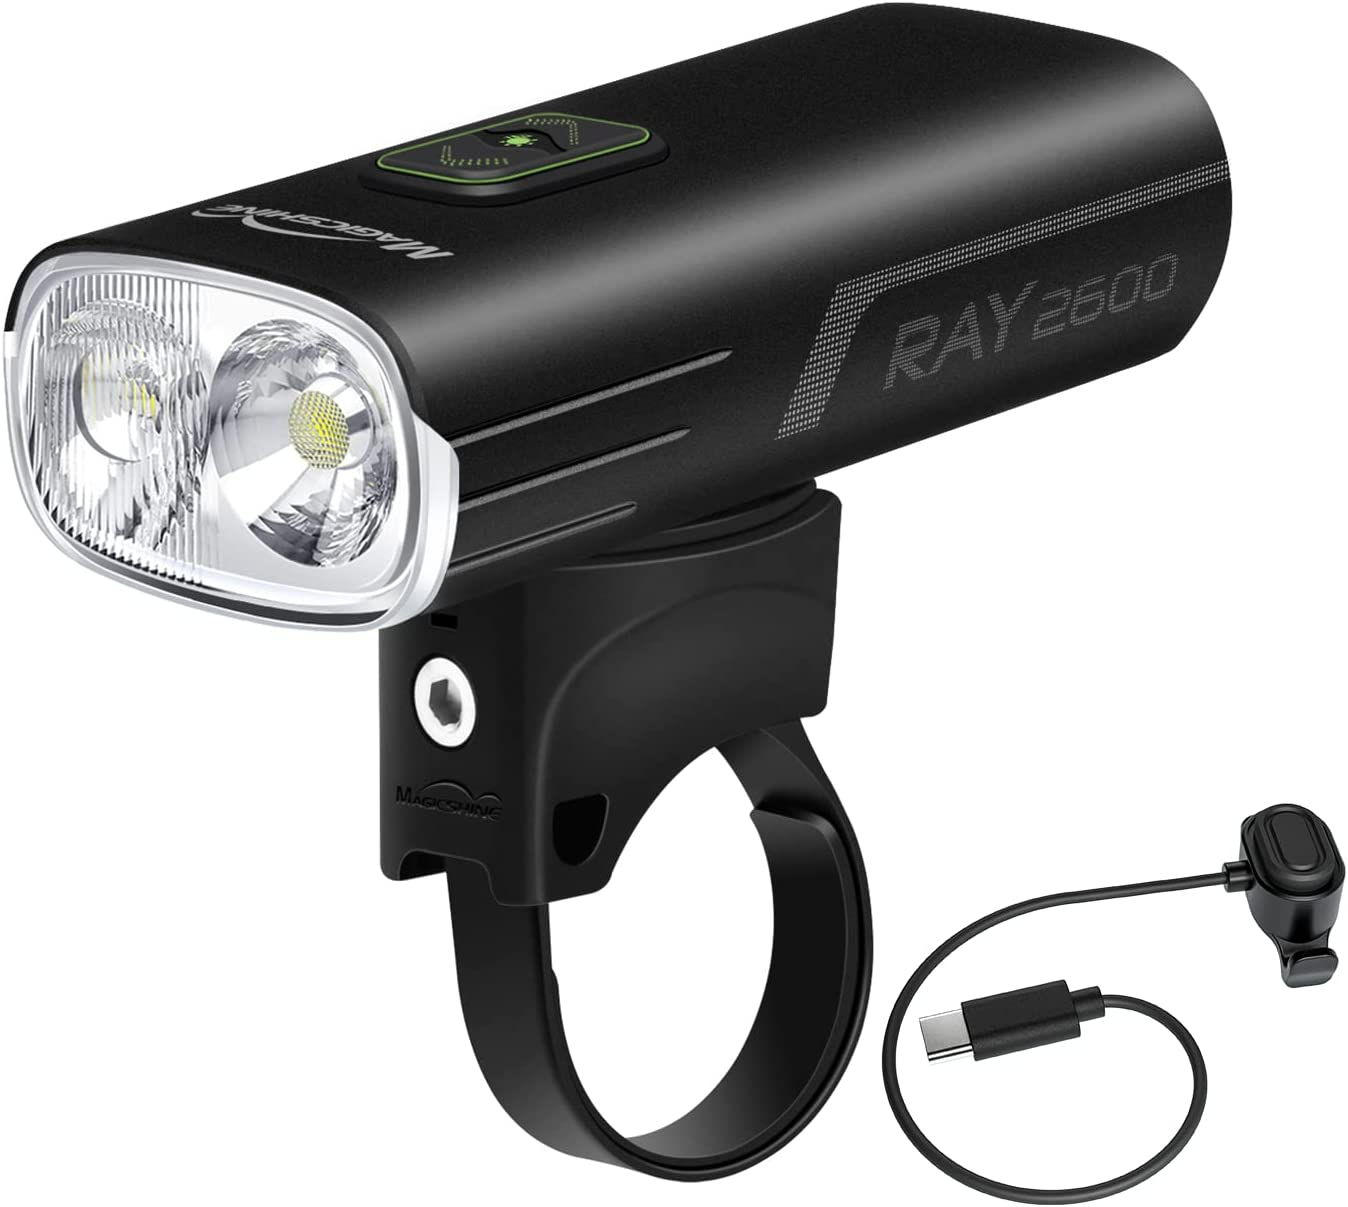 A rechargeable bike light should have the right amount of illumination, run time, and a suitable beam.